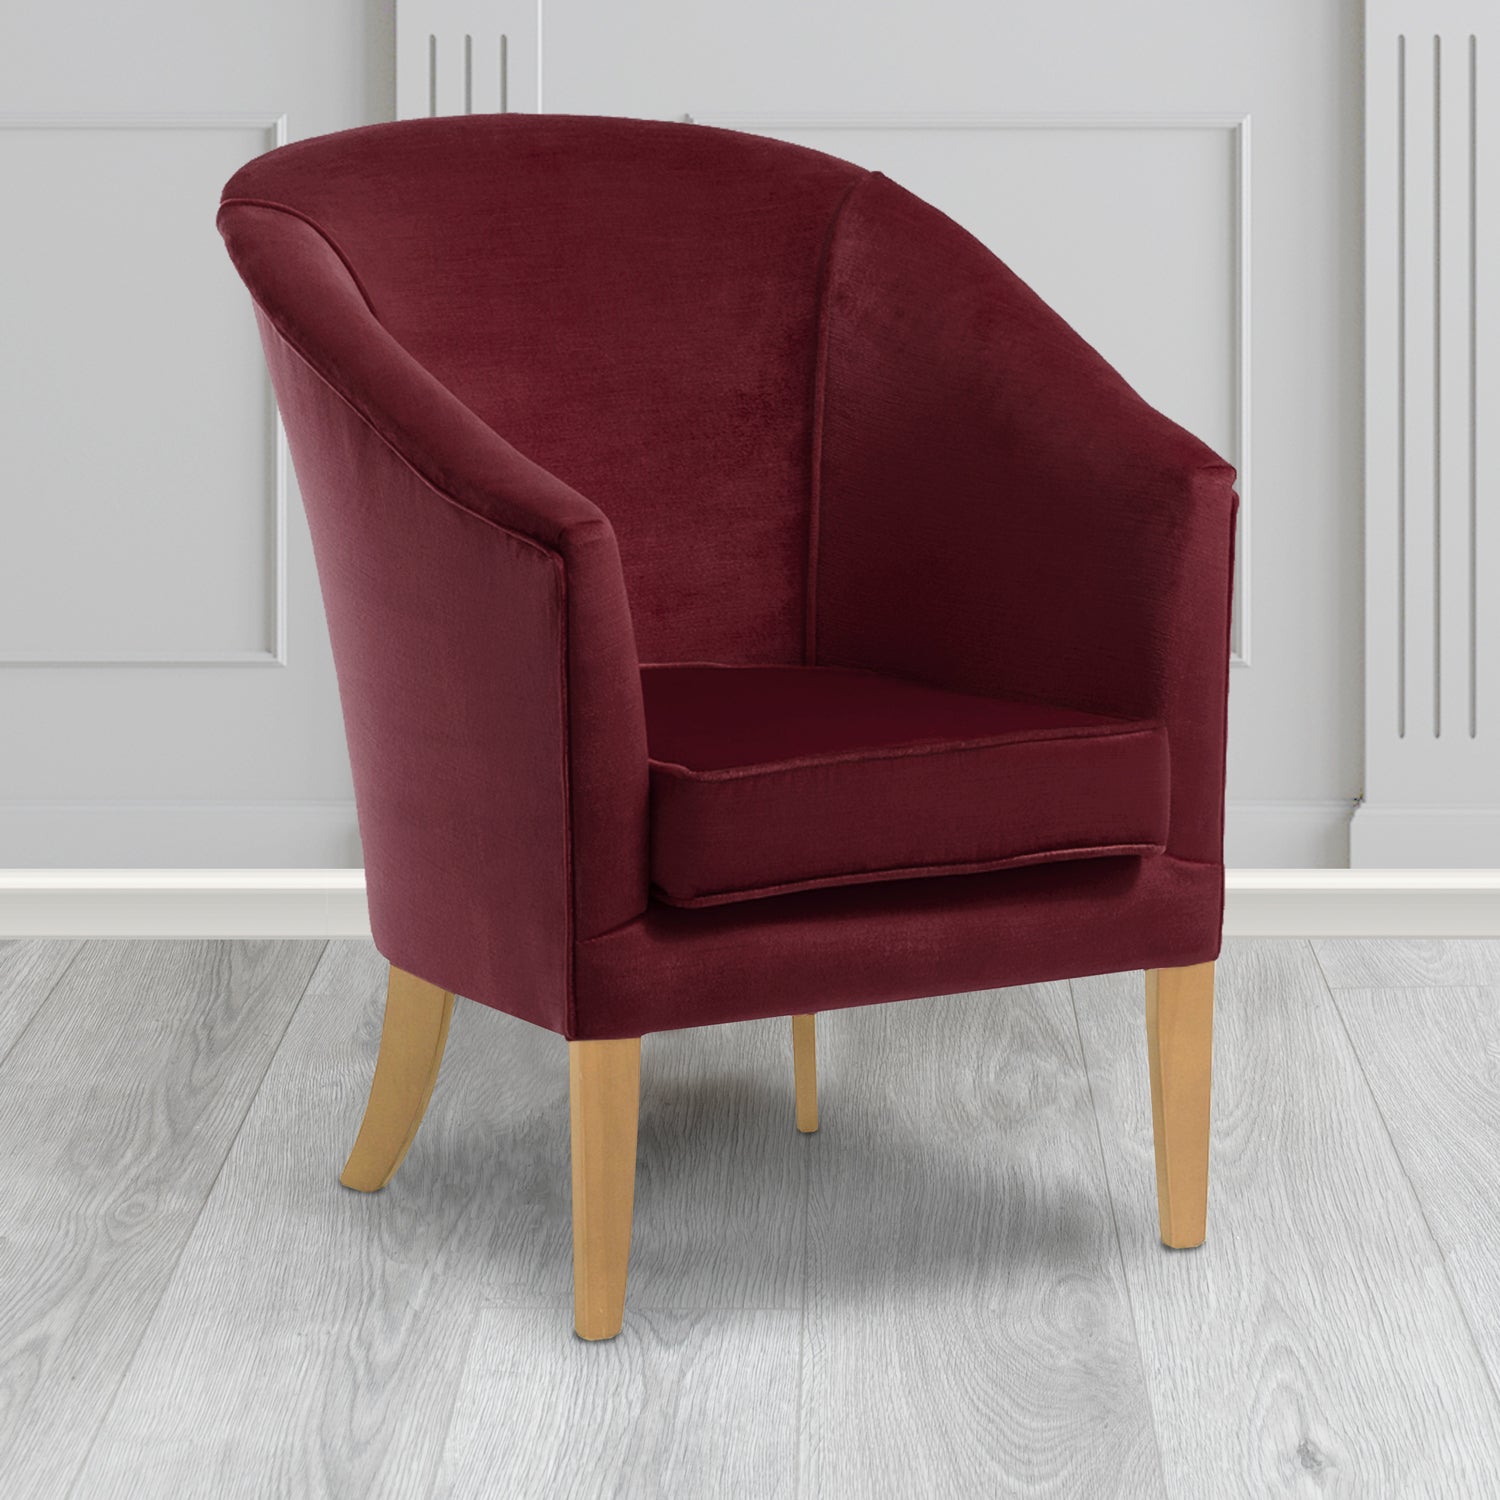 Burton Tub Chair in Noble 414 Wine Crib 5 Velvet Fabric - Water Resistant - The Tub Chair Shop